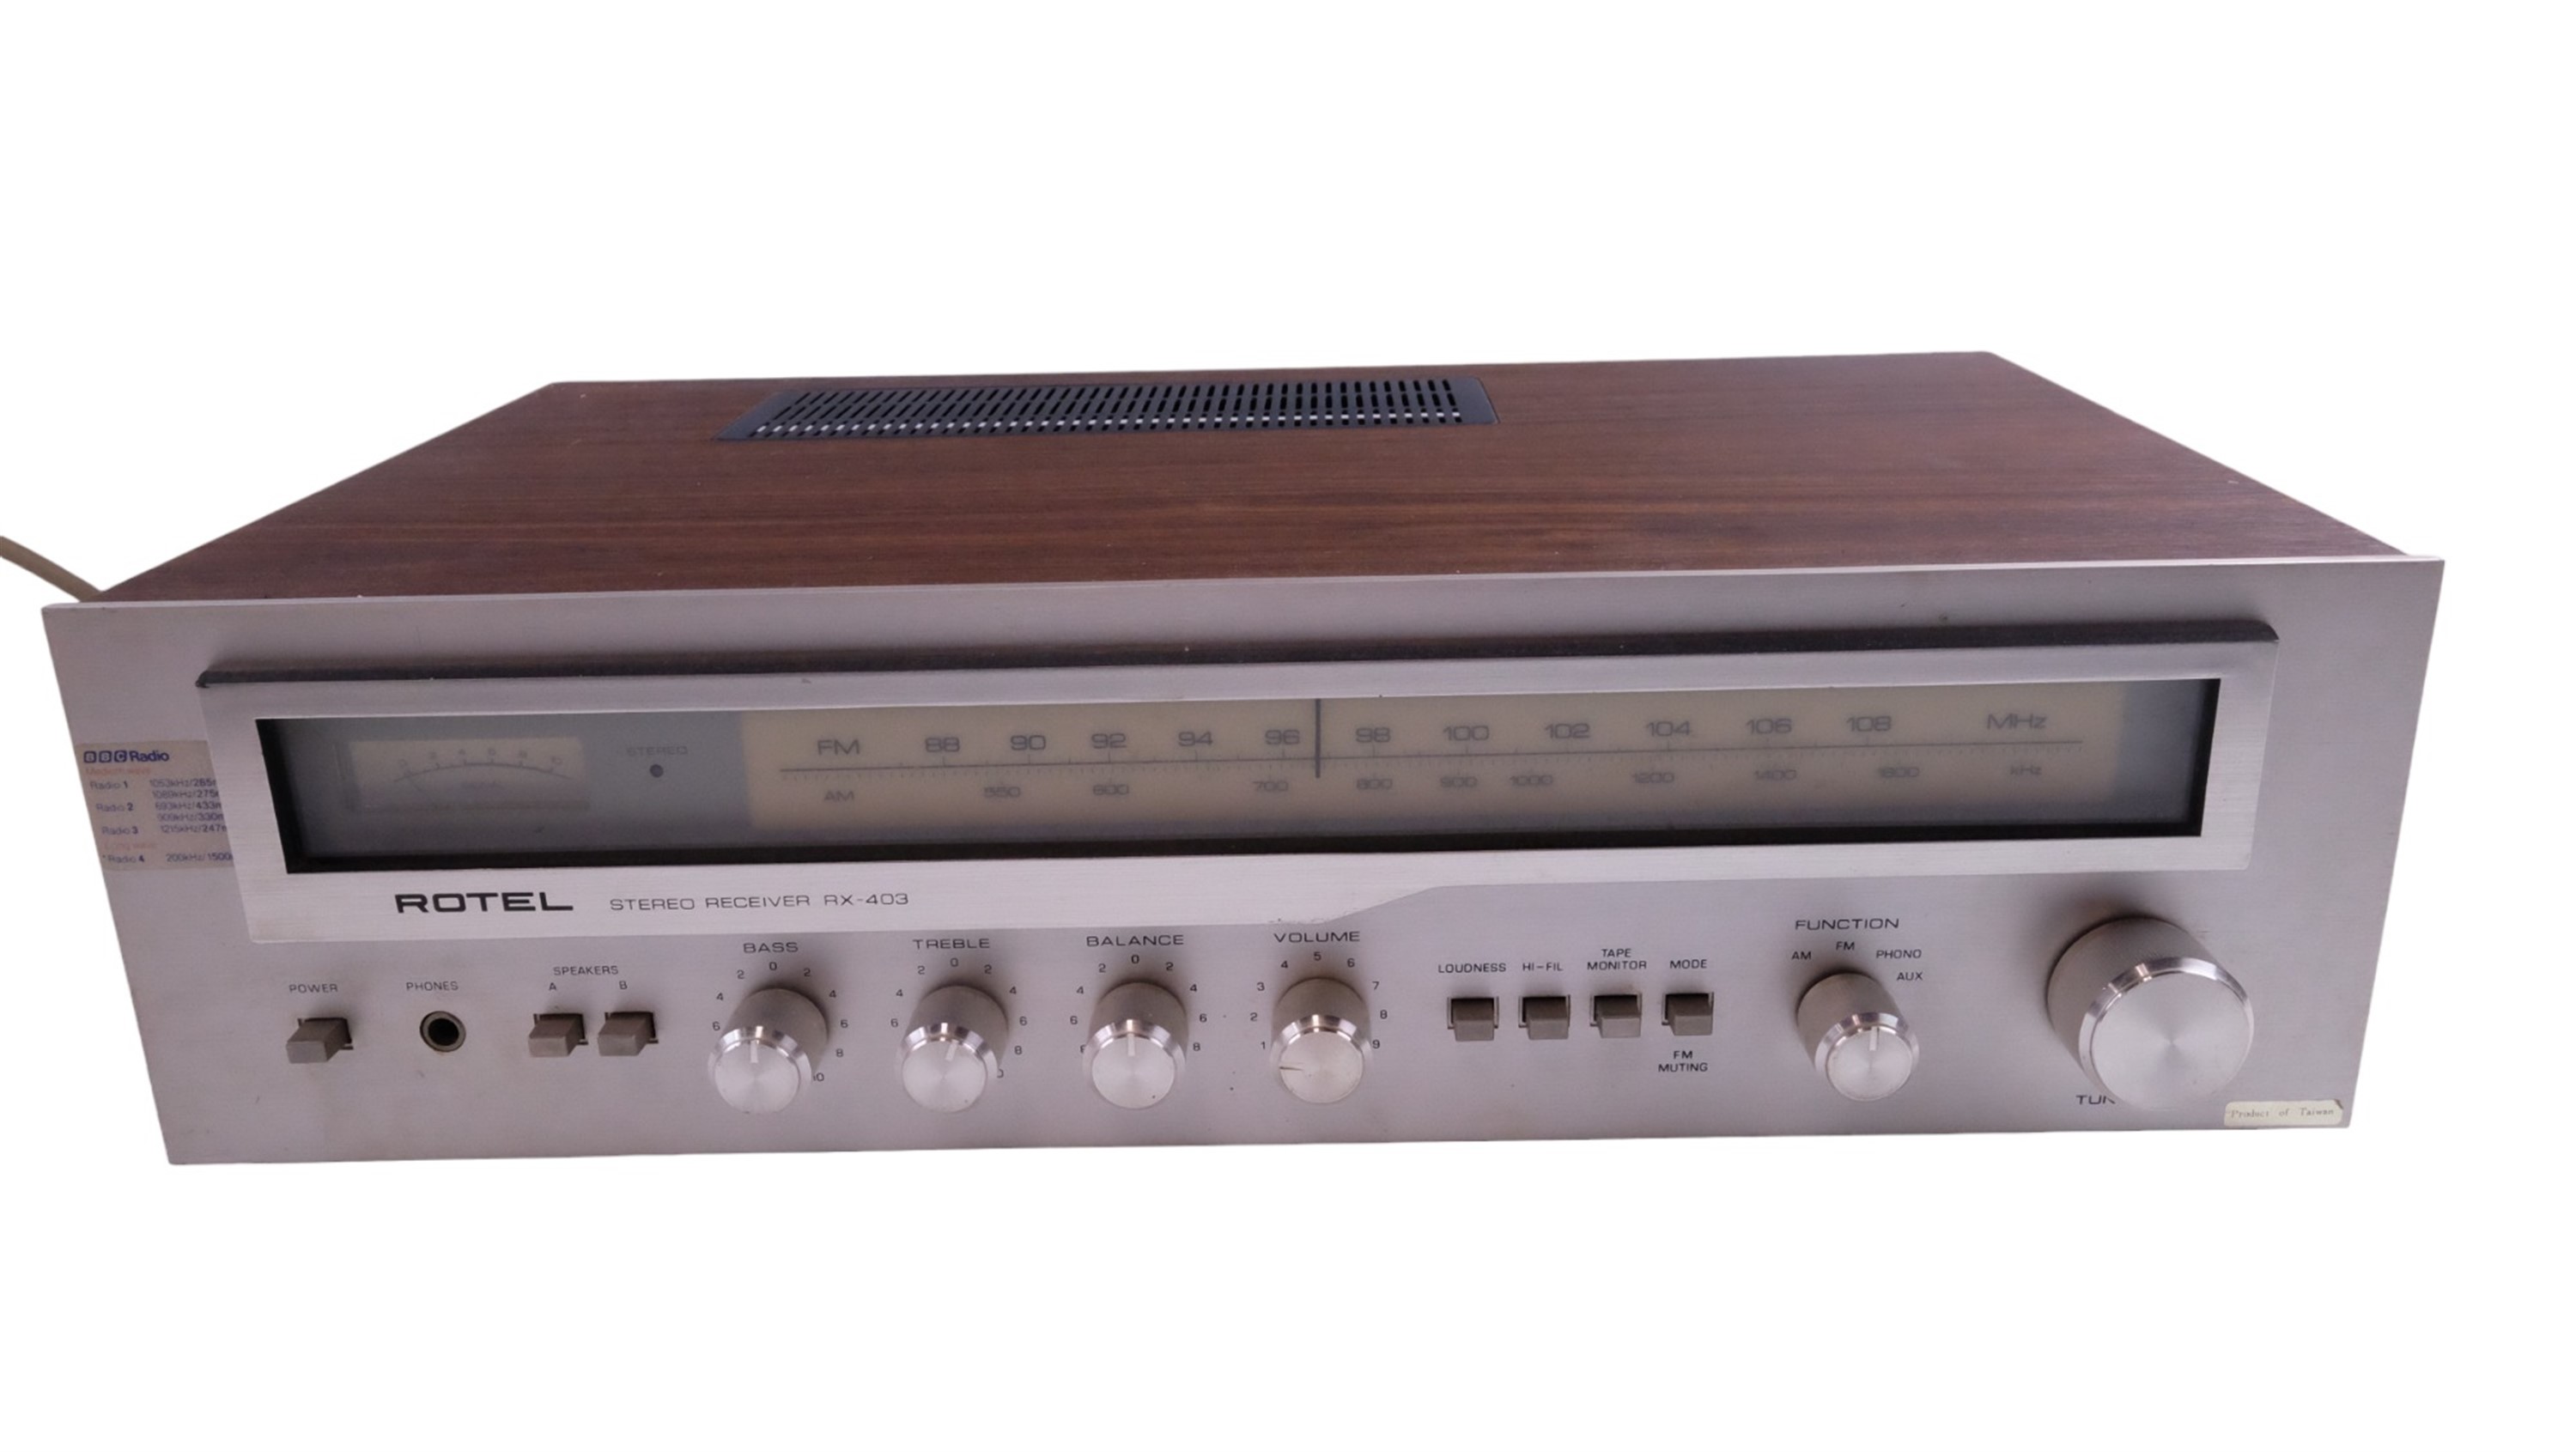 A Rotel RX-403 stereo AM/FM receiver, with owner's manual, 47 x 27.5 x 12 cm - Image 2 of 4